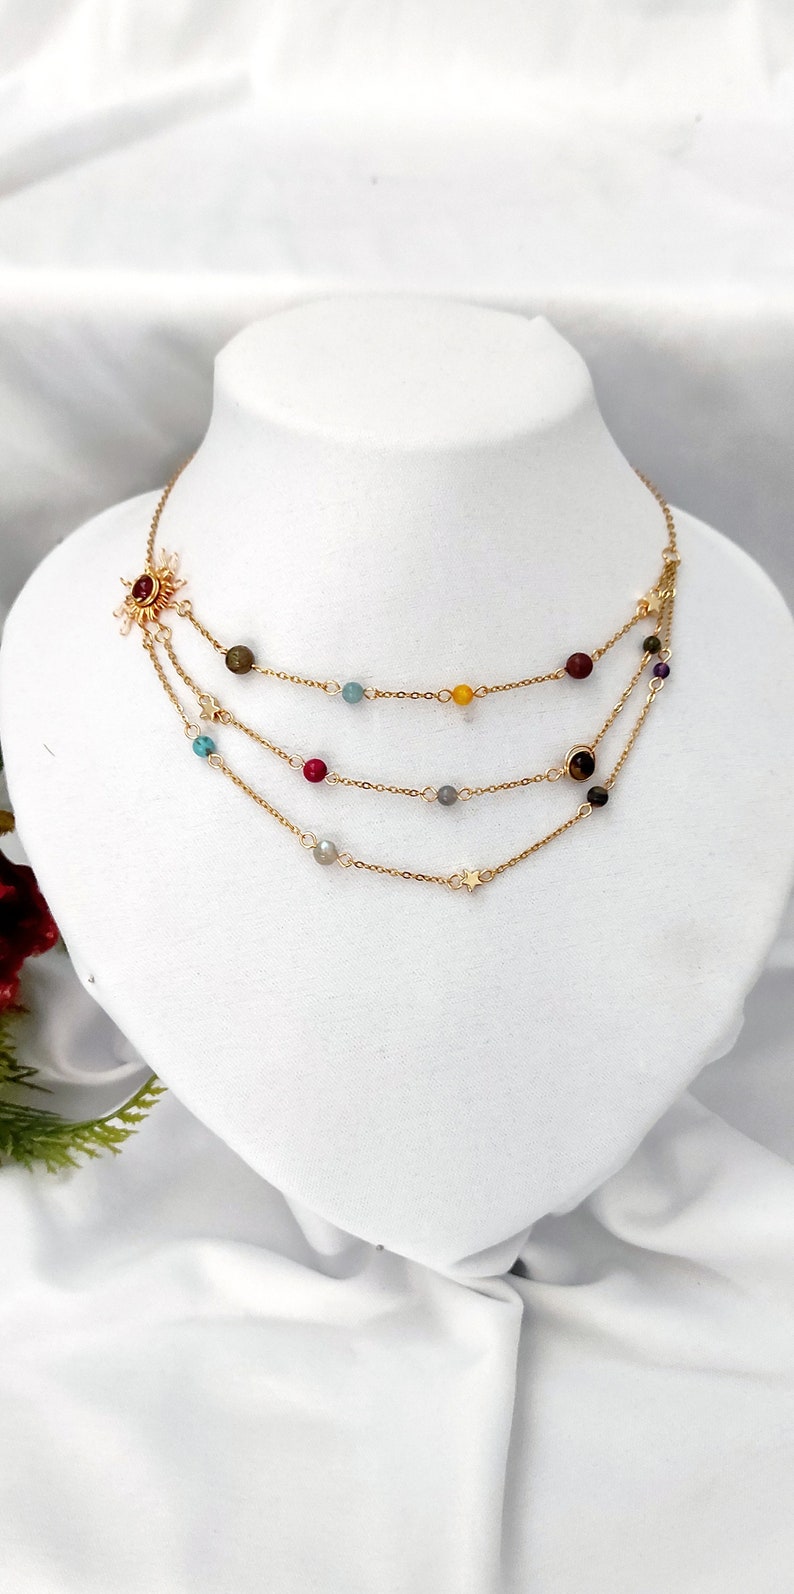 Sun Necklace, Crystal Necklace,Gold Stainless Steel Layered Necklace, Multi Chain Necklace image 1